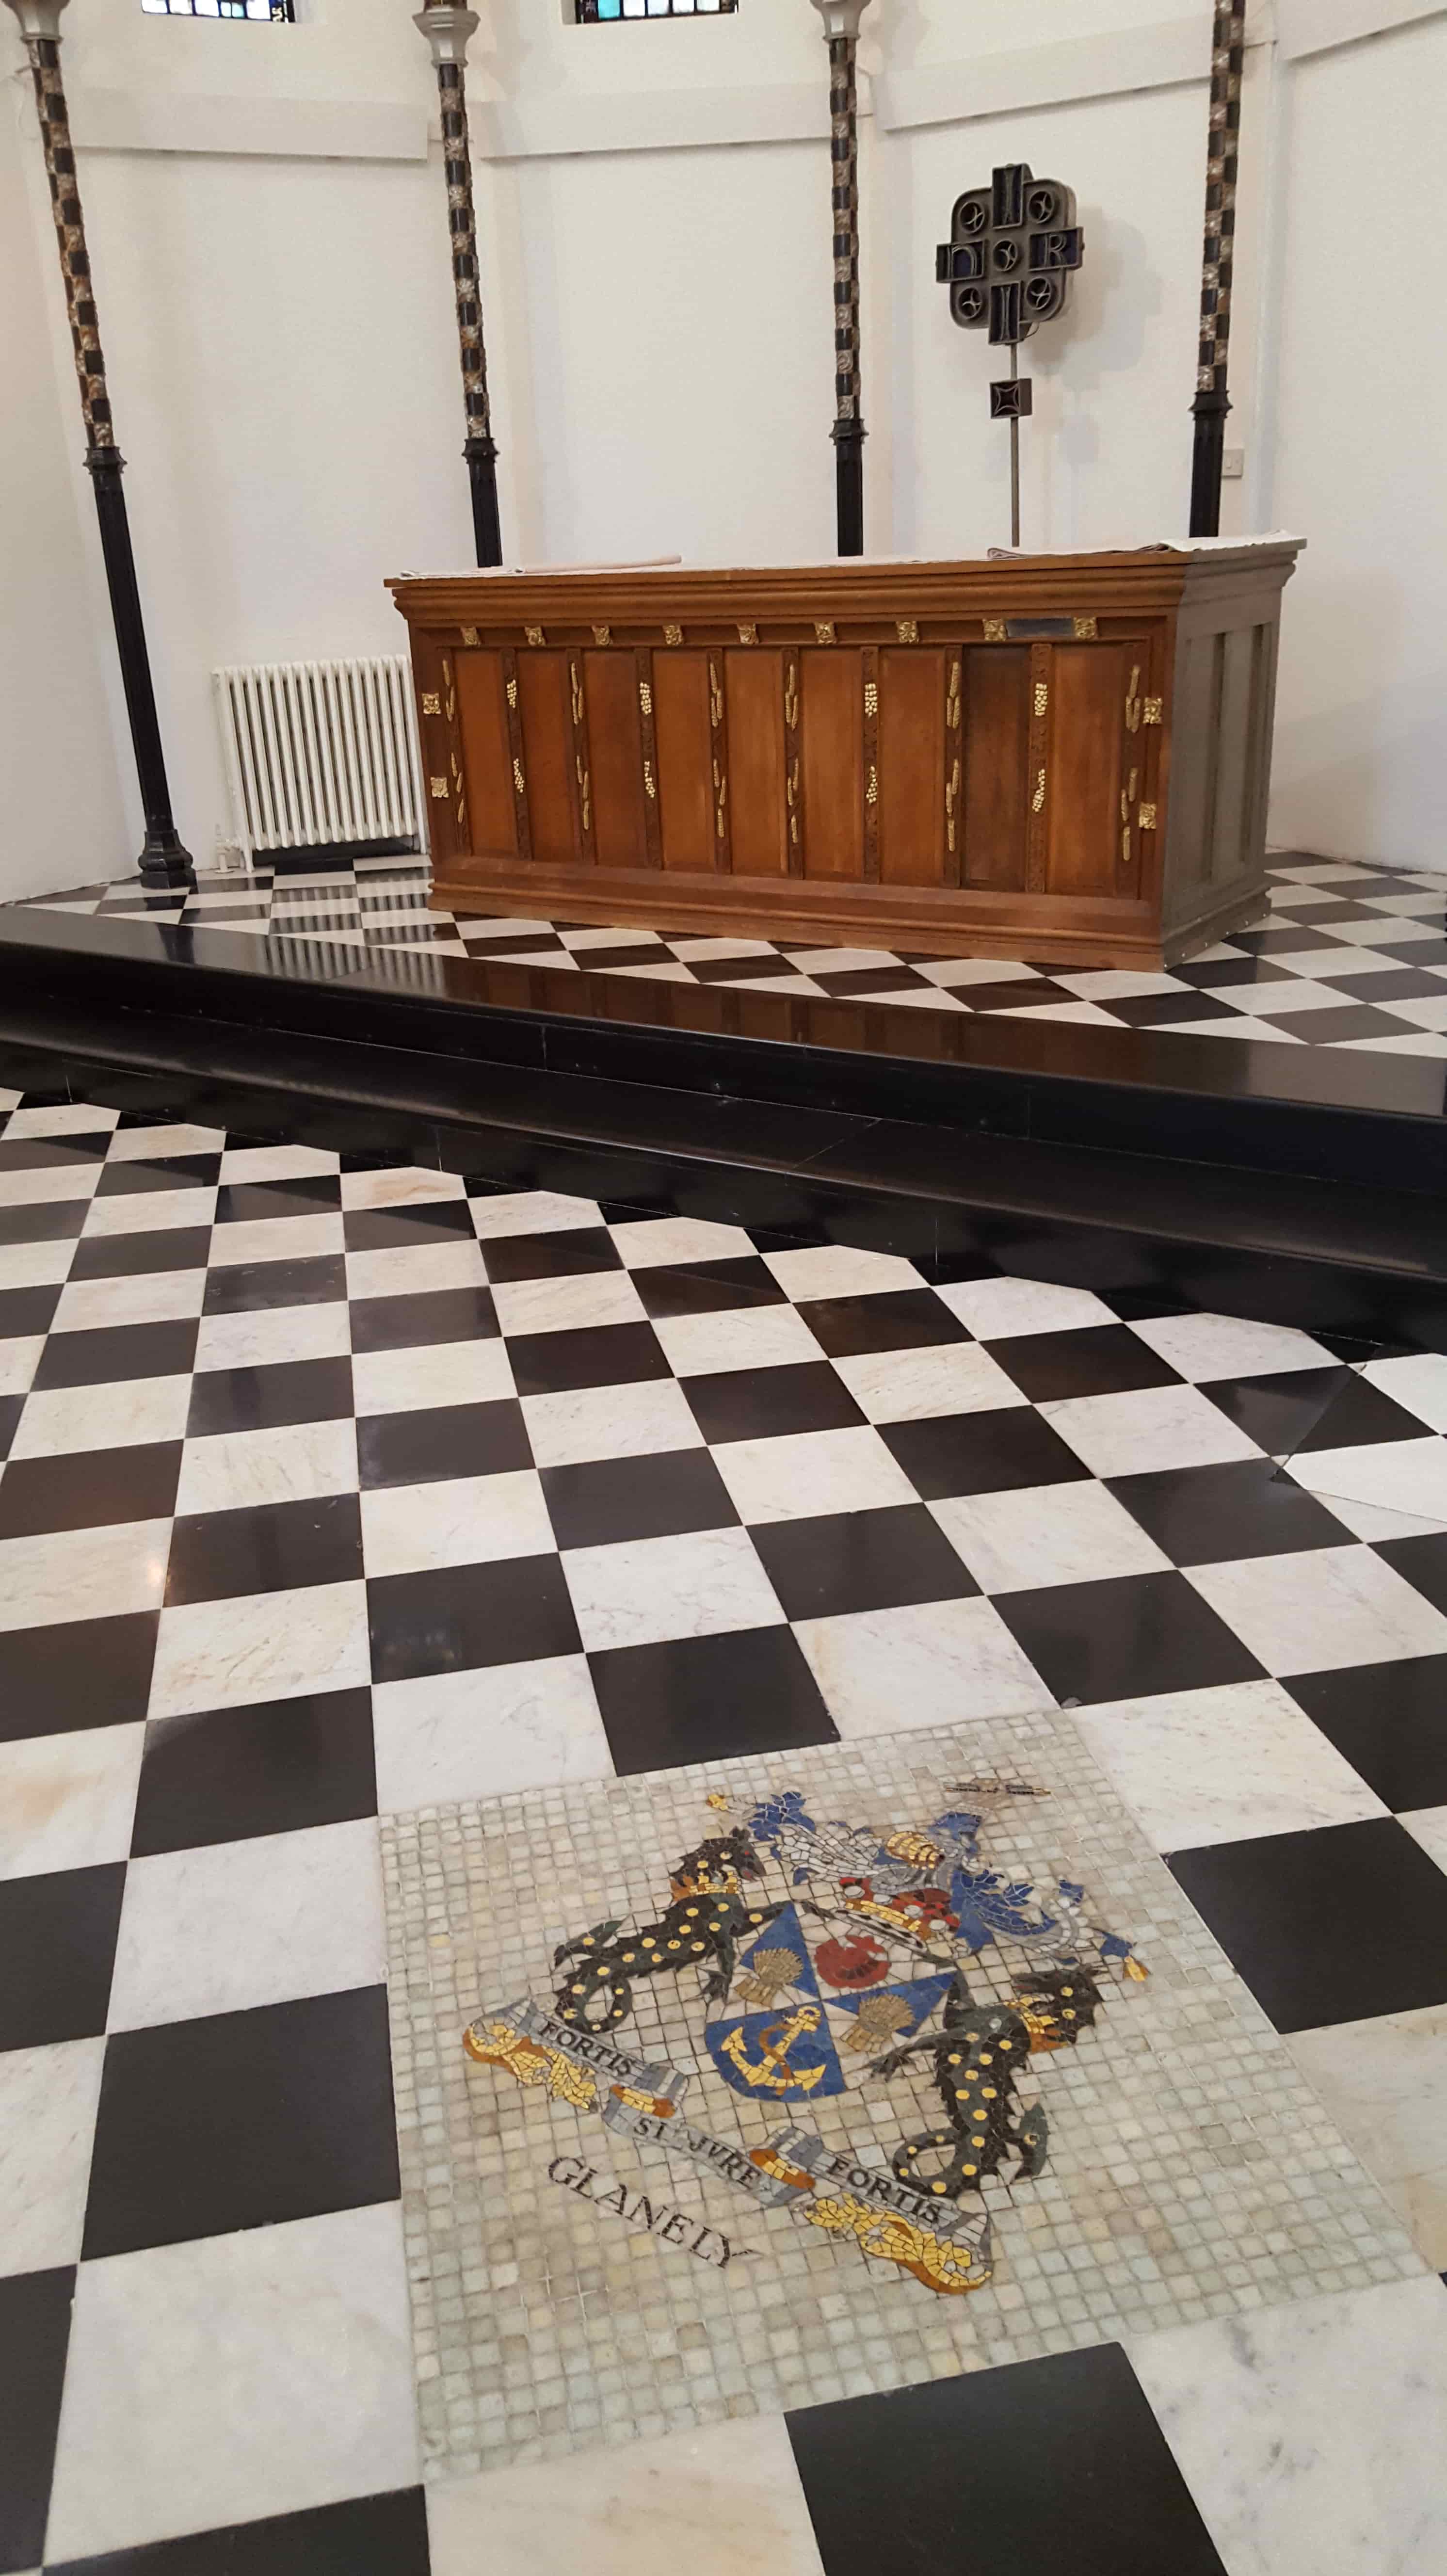  Black  and White  Marble  Church Floor  Tiles Renovated in Ely 